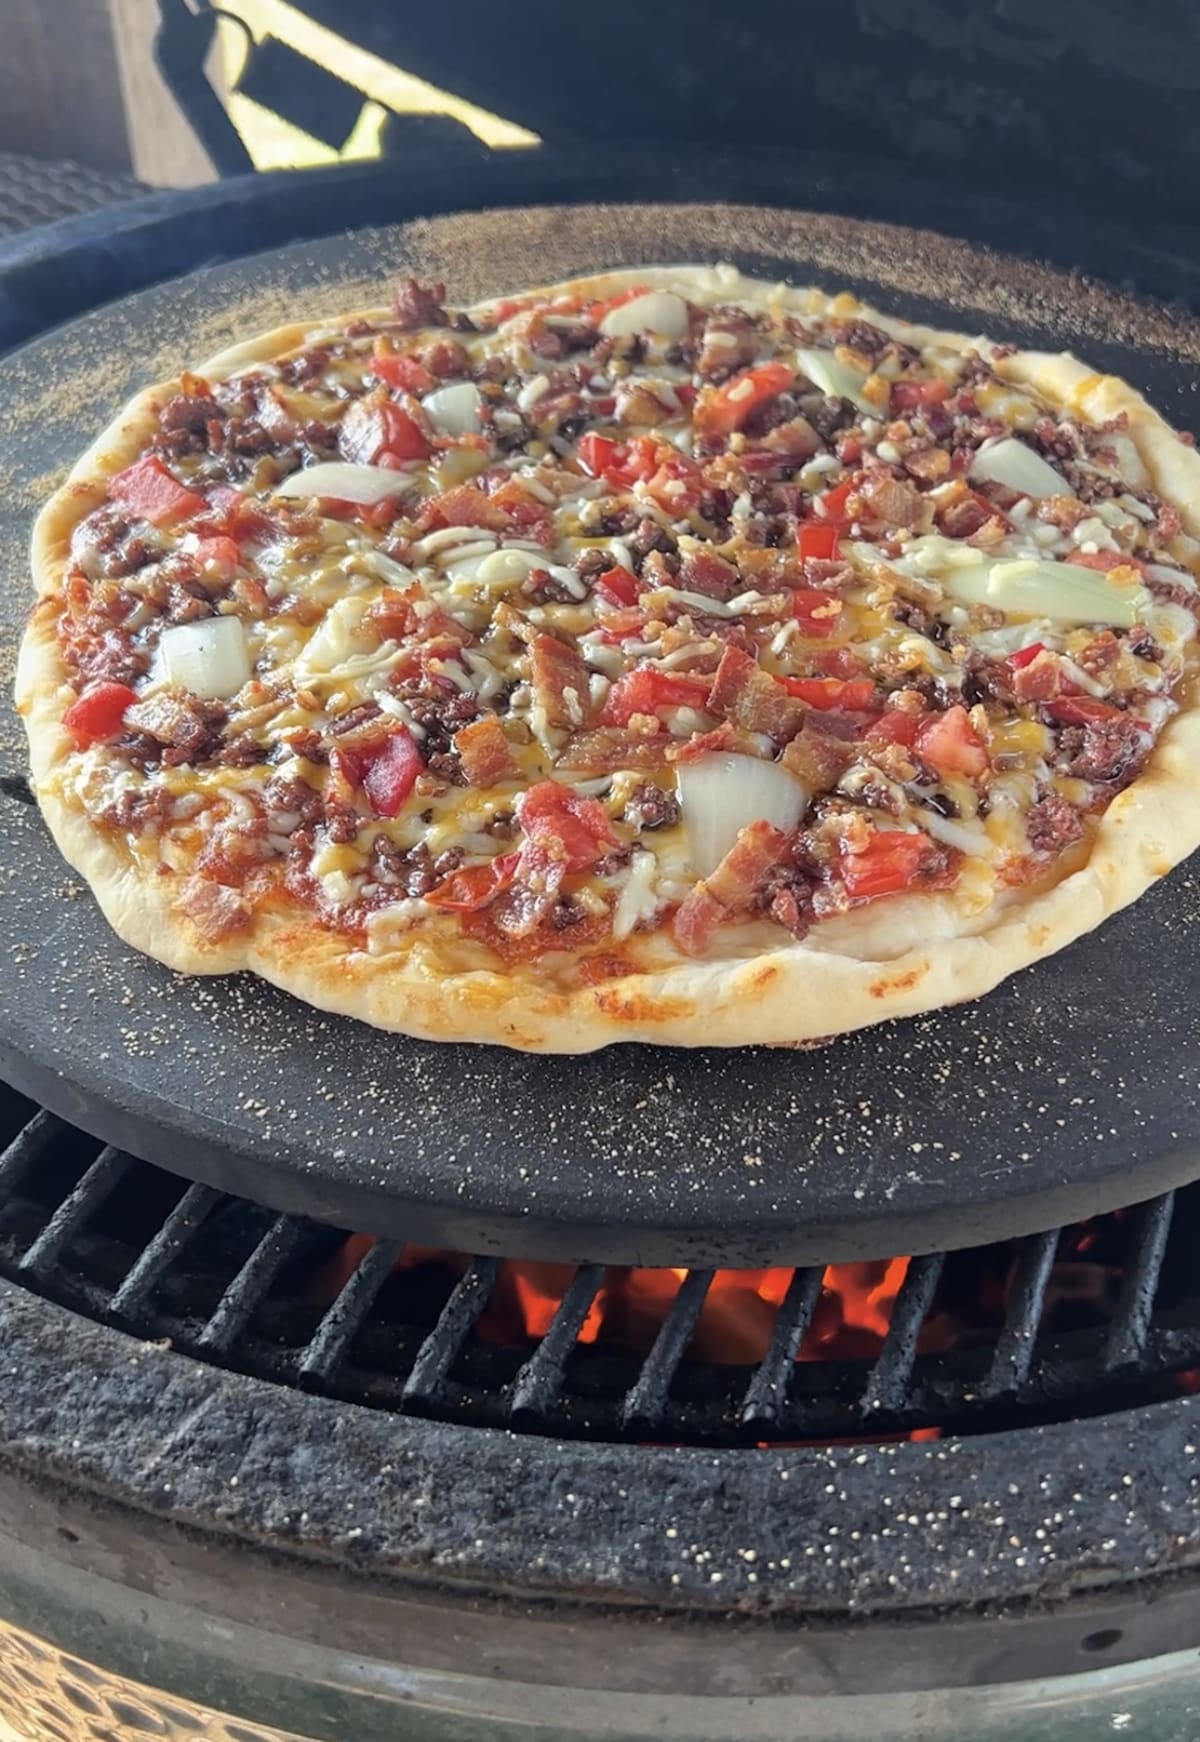 Grilling pizza on a pizza stone.